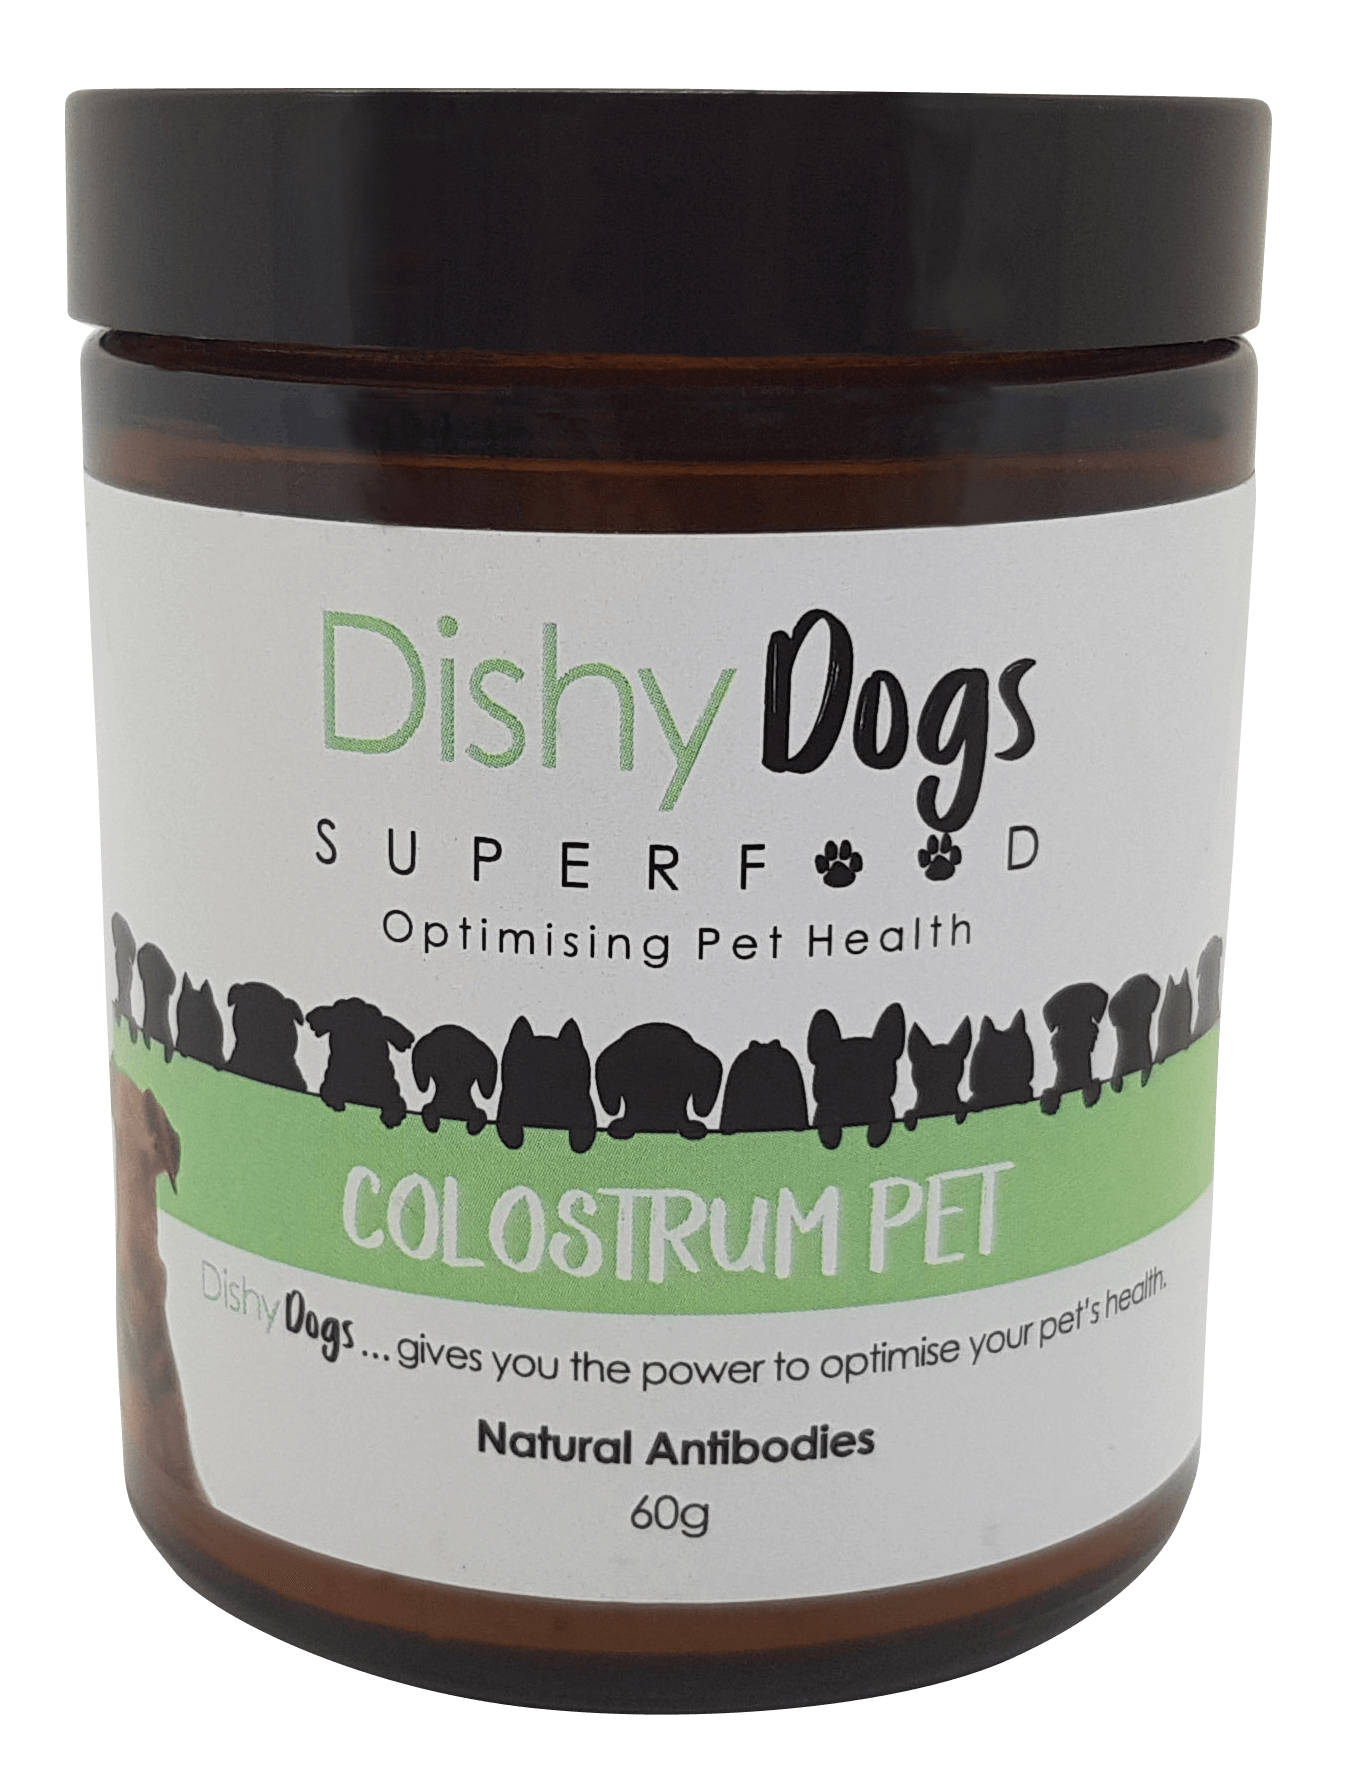 colostrum for dogs, colostrum for puppies, colostrum for dogs with cancer, colostrum for dogs with allergies, is colostrum safe for dogs, colostrum for dogs with kidney disease, colostrum for dogs near me